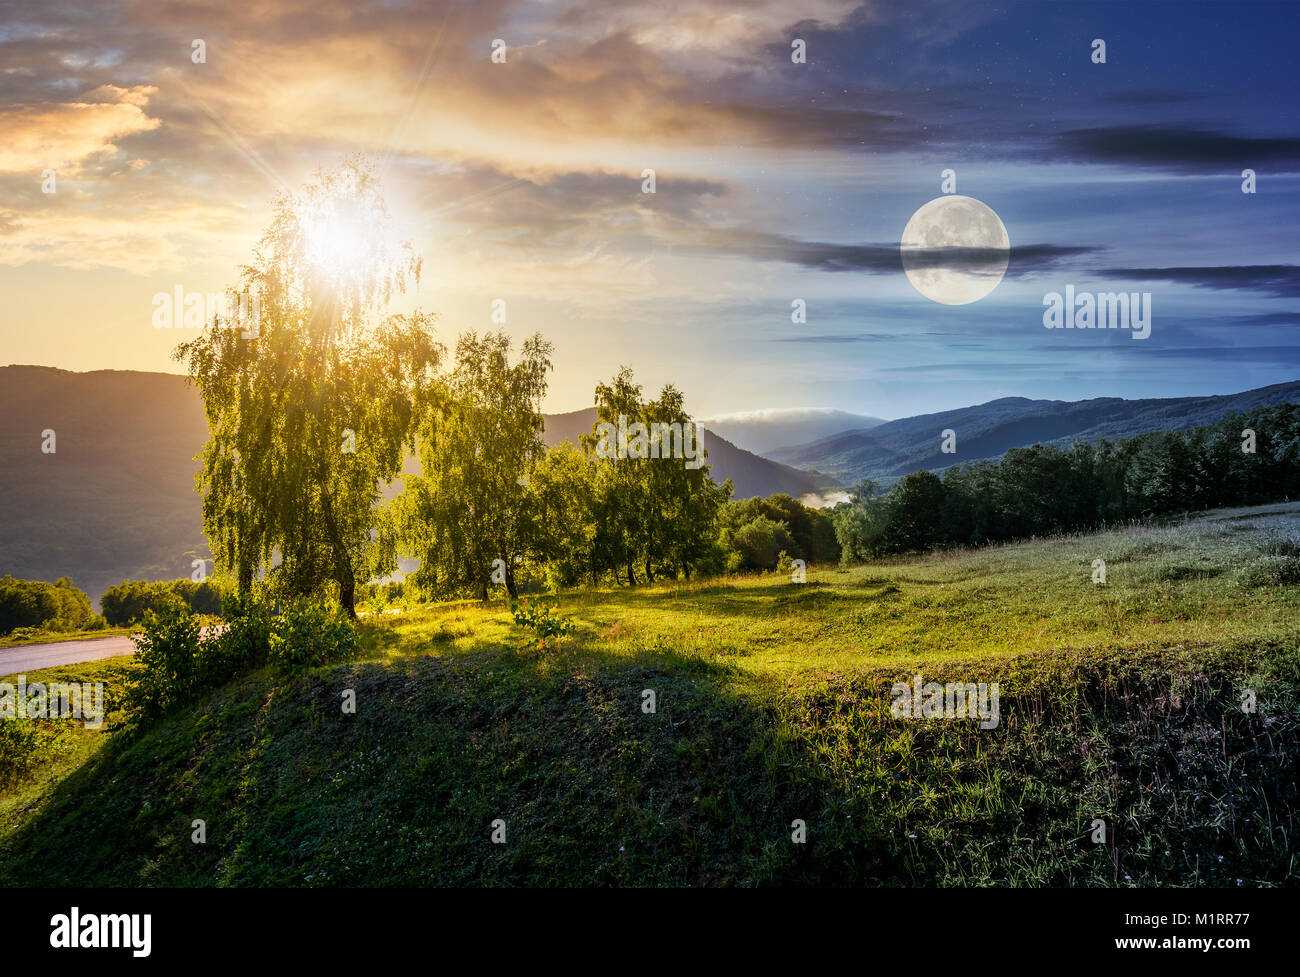 time change concept over the trees on grassy hill in mountains. lovely nature scenery with sun and moon Stock Photo